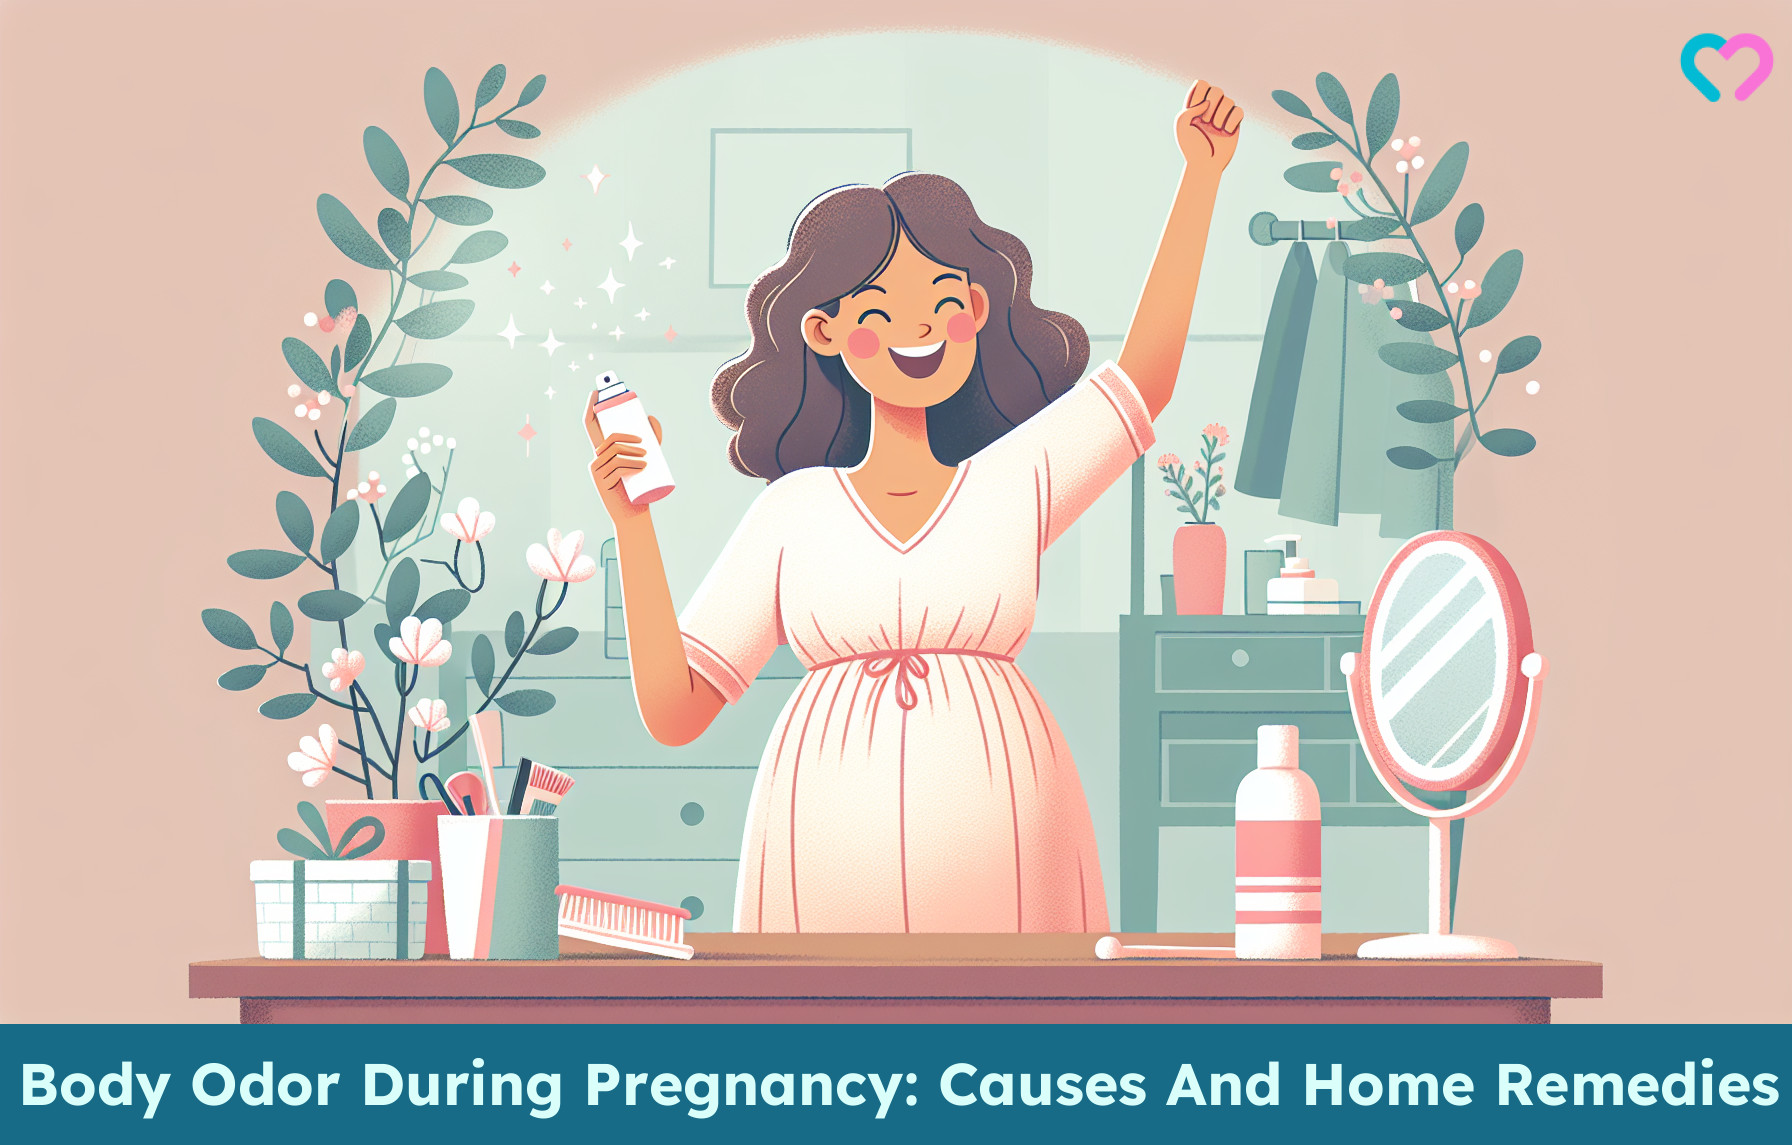 Body Odor During Pregnancy: Causes And Home Remedies